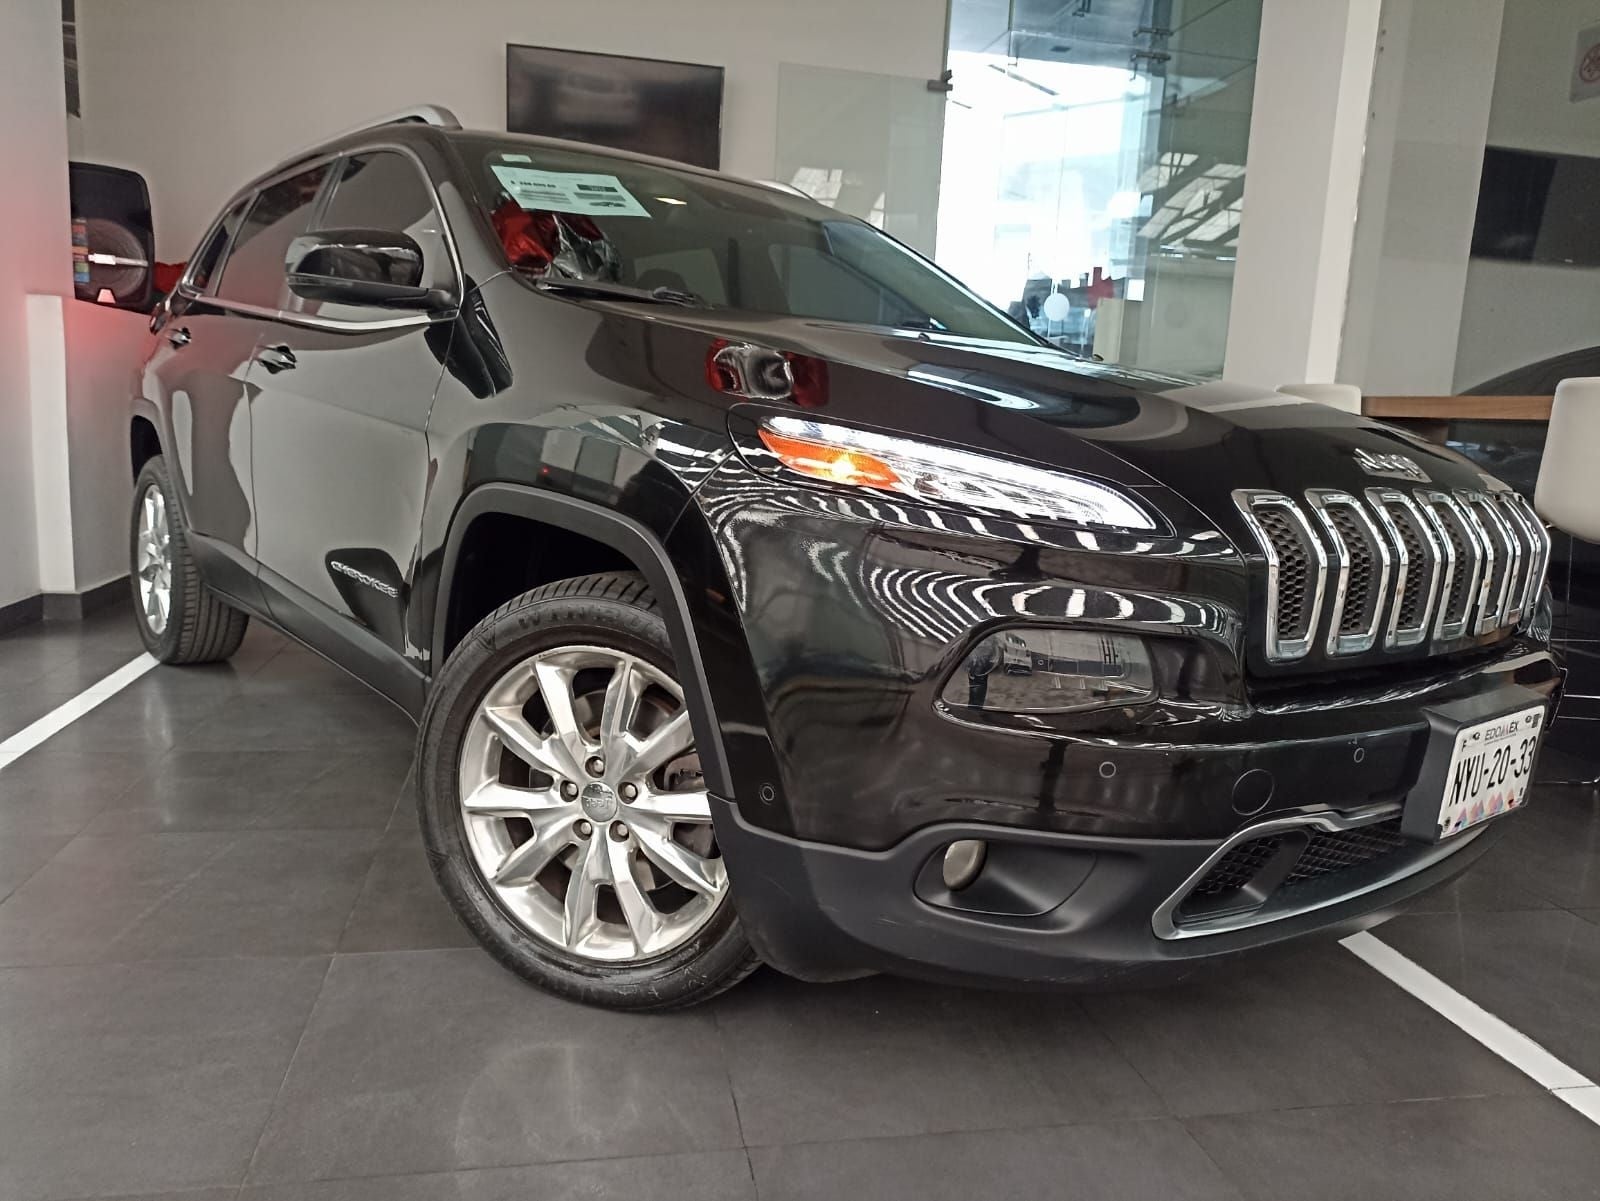 2015 Jeep Cherokee 2.4 Limited Premium At